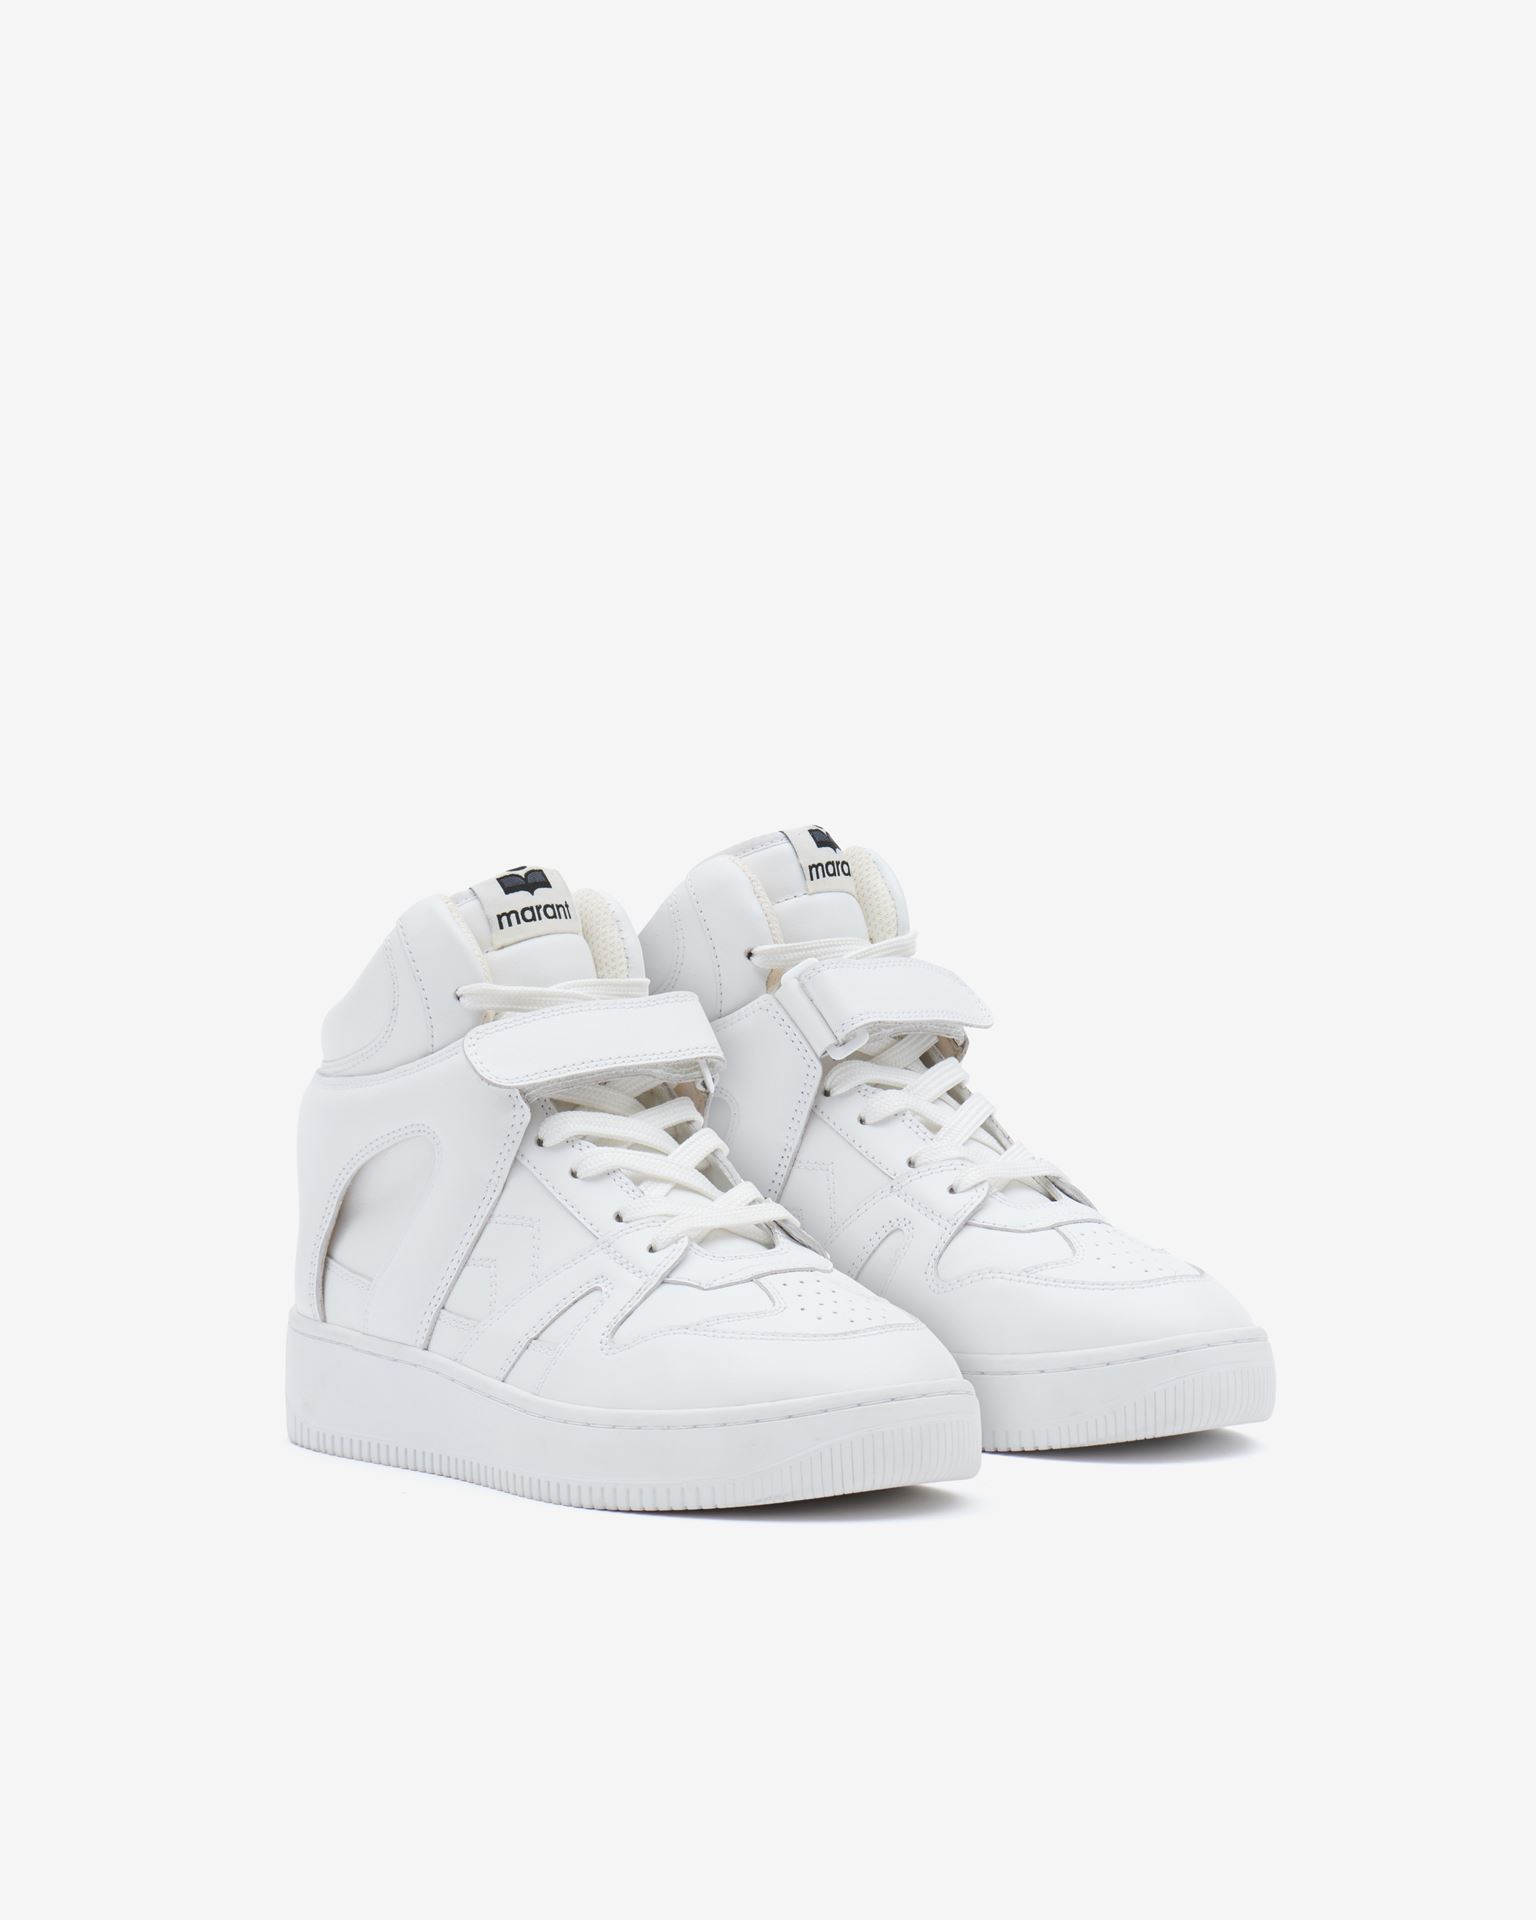 Isabel Marant, Brooklee Leather Sneakers - Women - White